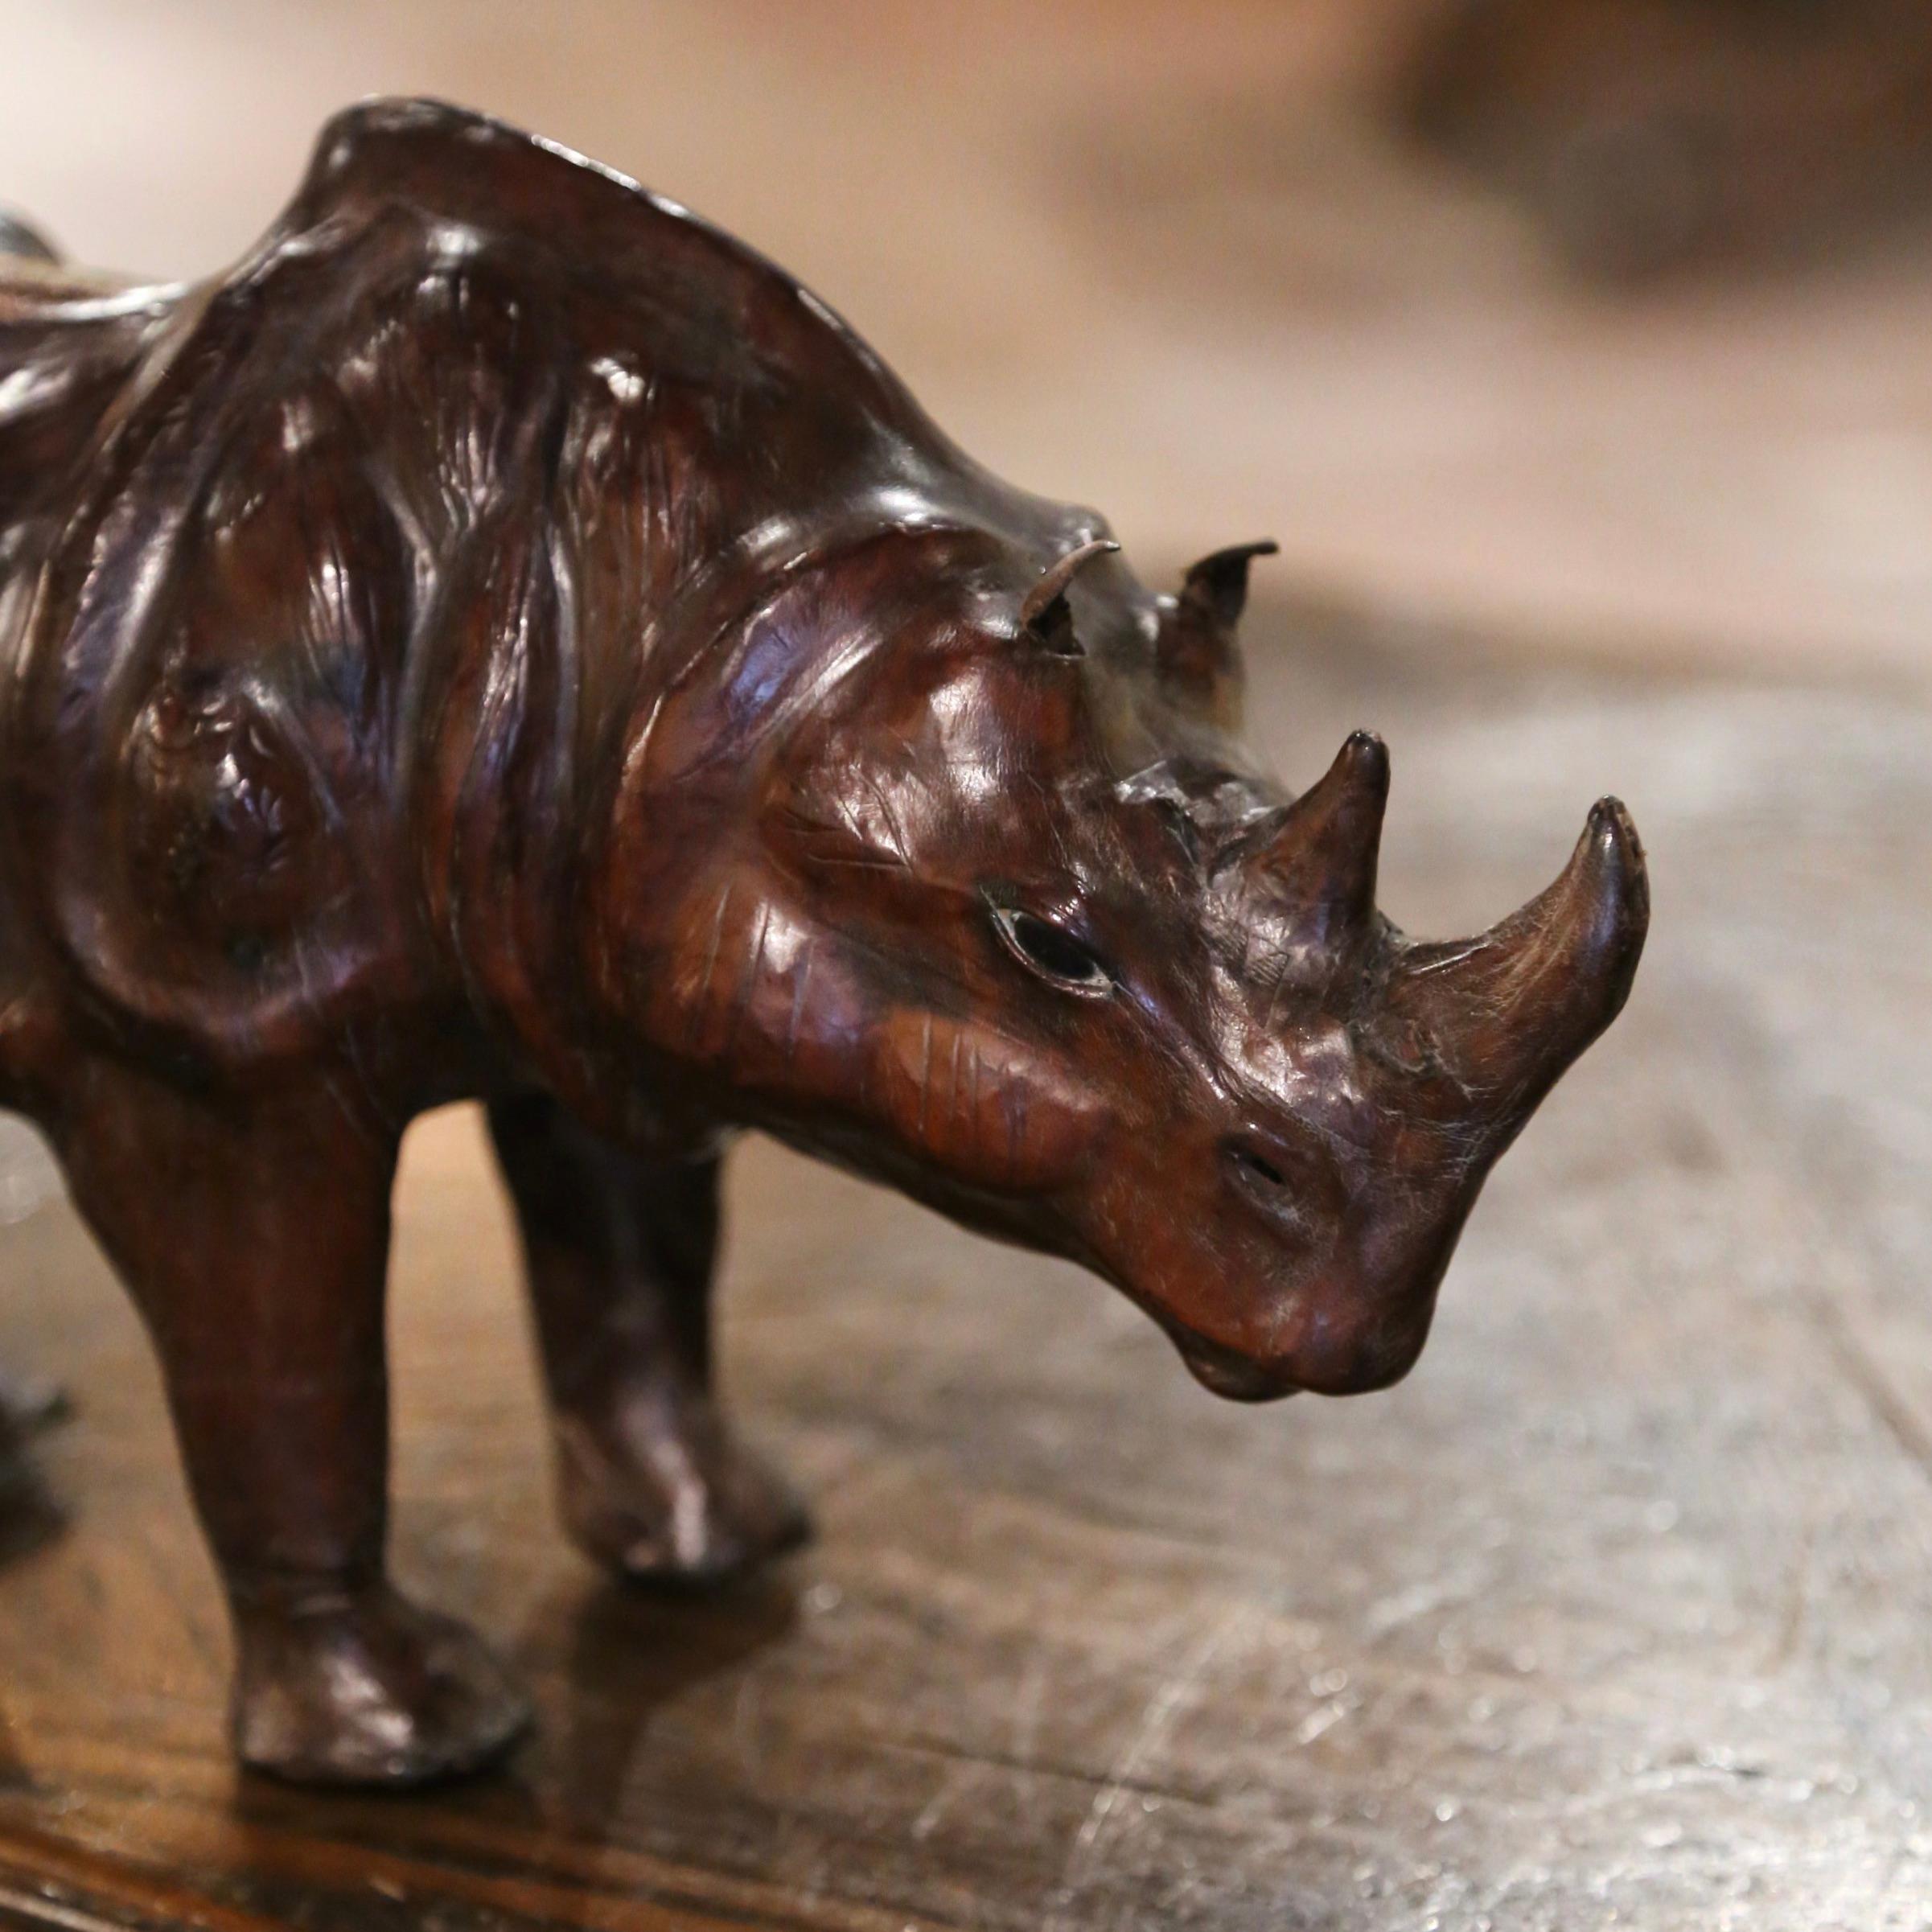 This beautiful, antique rhinoceros sculpture was crafted in France, circa 1880. The detailed leather figure standing on his four legs is in excellent condition and adorns a rich old patinated finish. Place this sculpture on a shelf in a study or